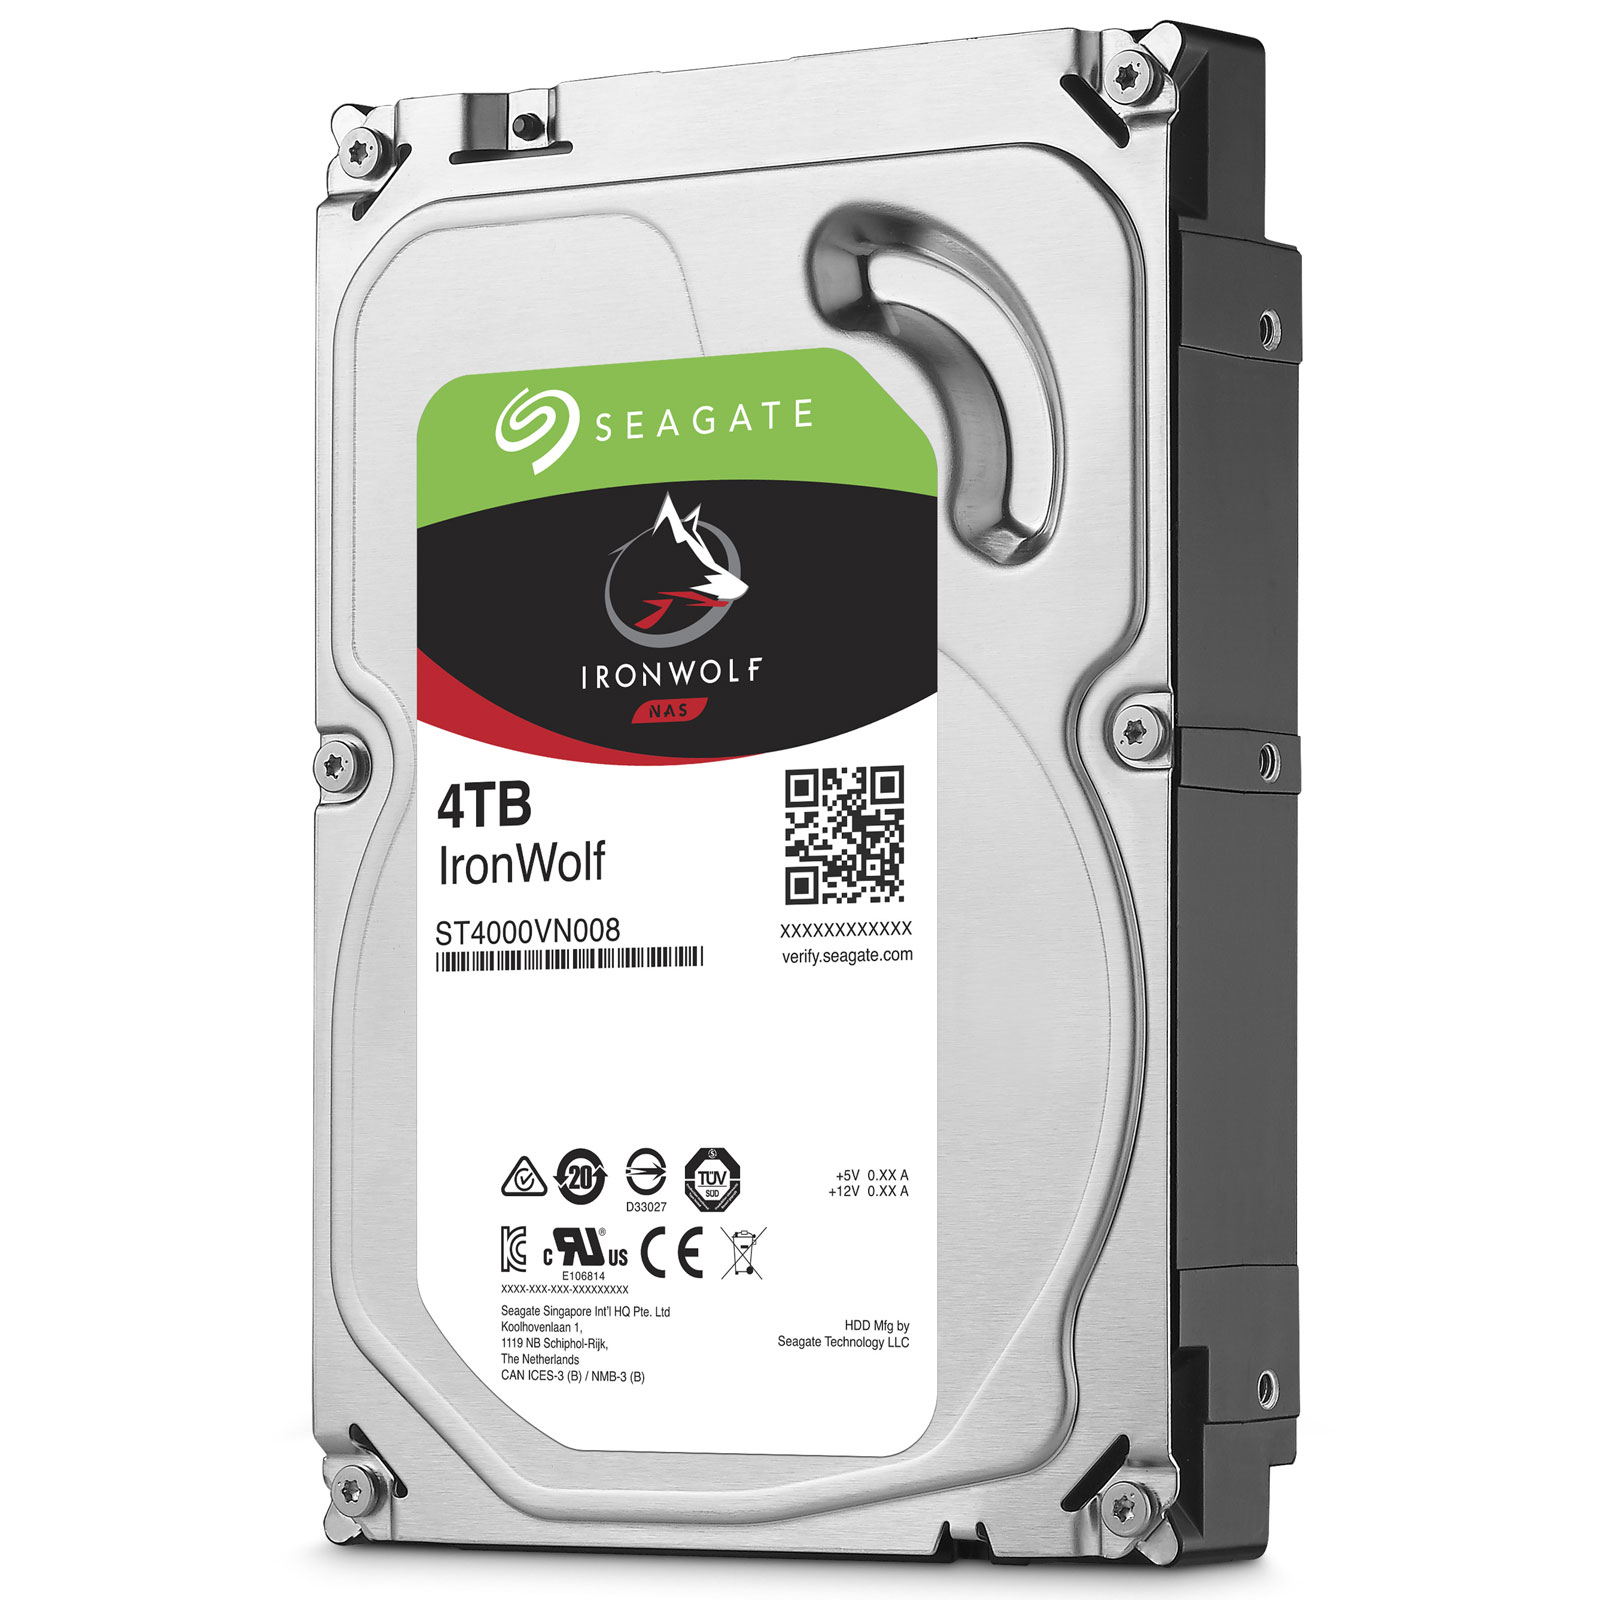 HDD Seagate IronWolf 4TB ST4000VN008 3.5 inch SATA III 64MB Cache 5900RPM